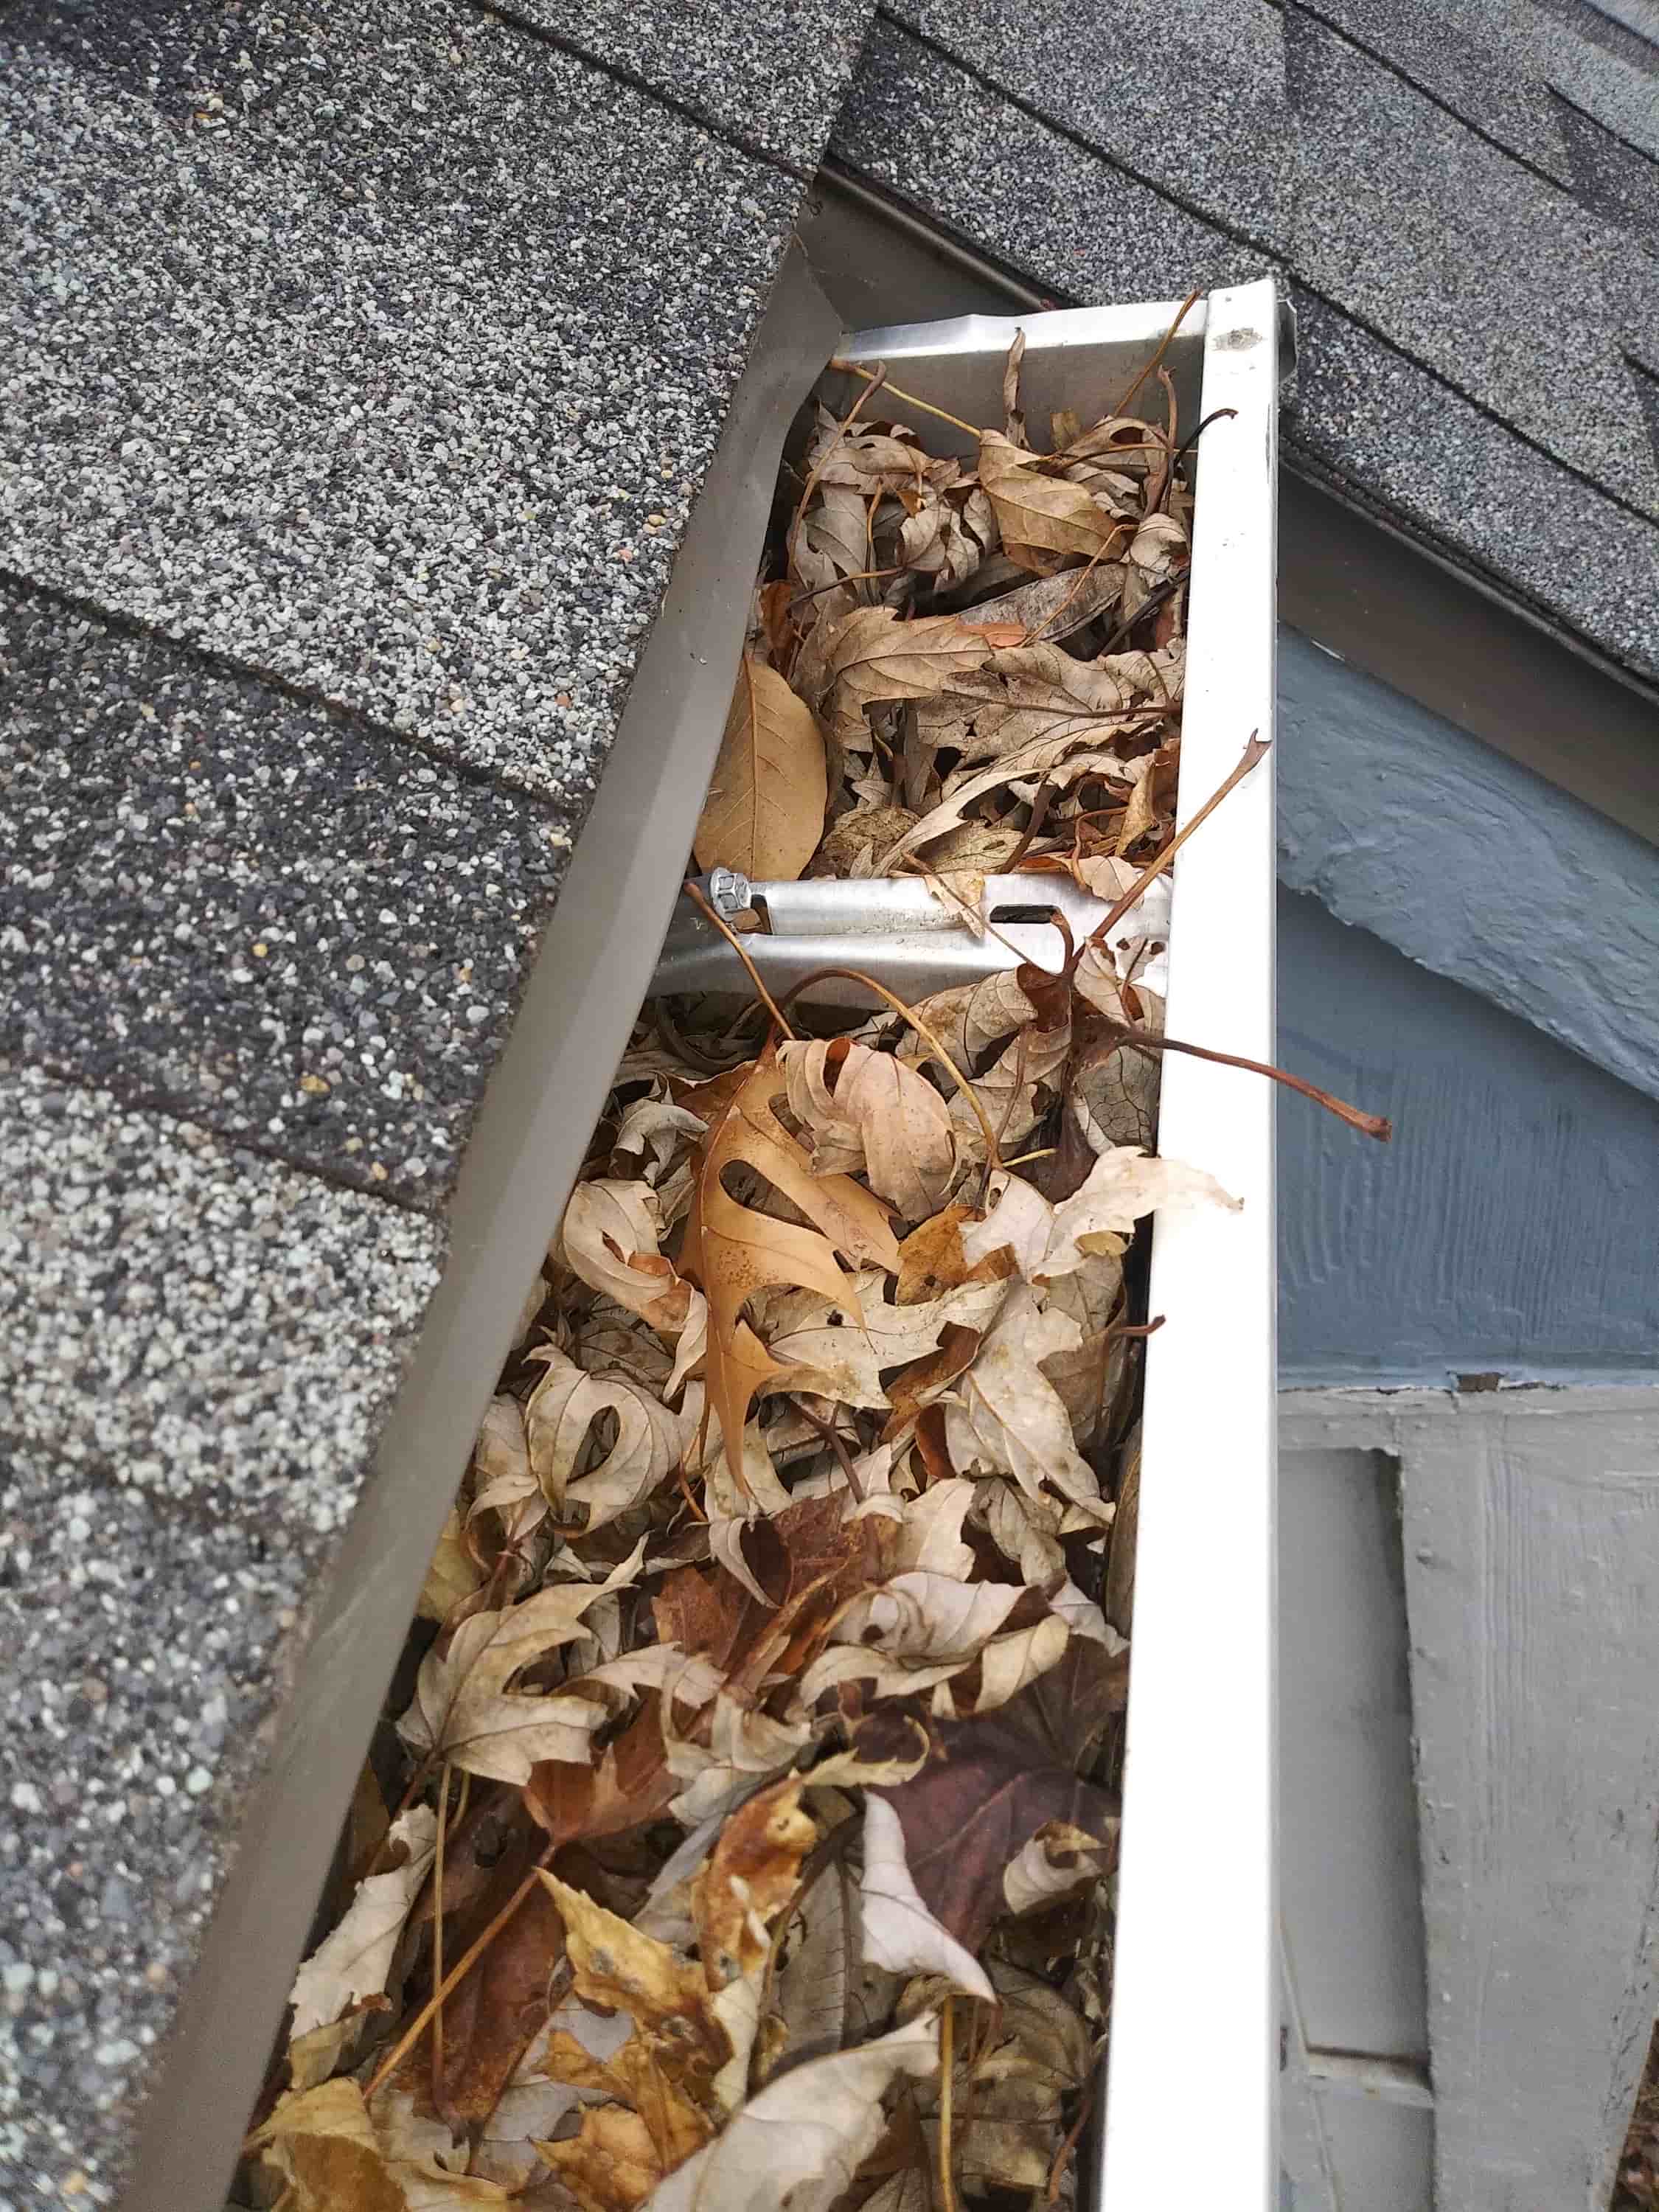 gutter cleaning devices